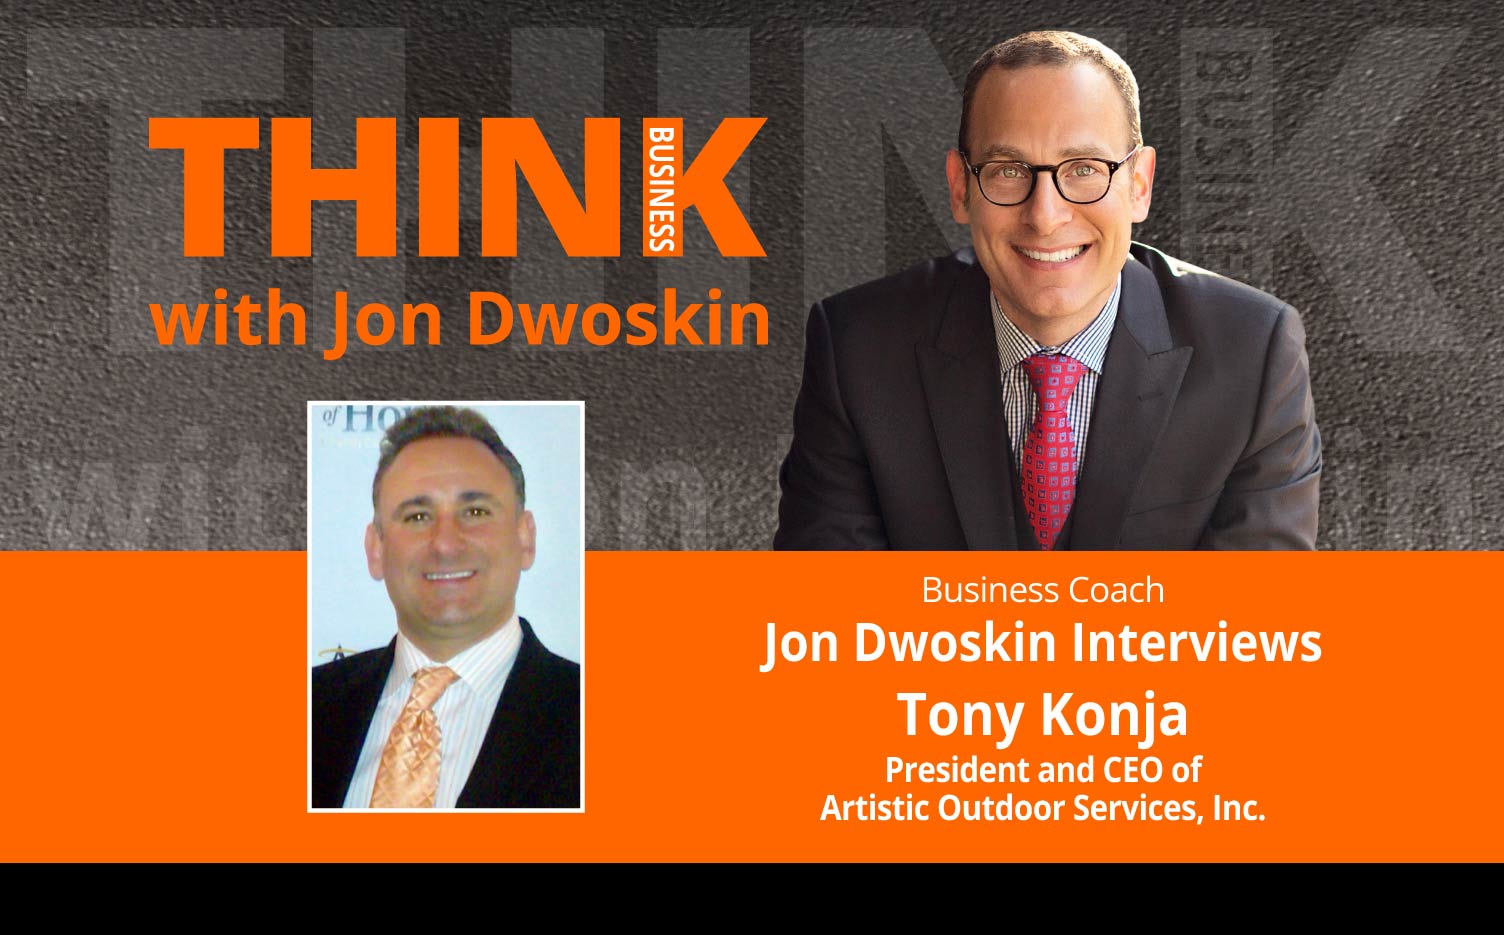 THINK Business Podcast: Jon Dwoskin Interviews Tony Konja, President and CEO of Artistic Outdoor Services, Inc.